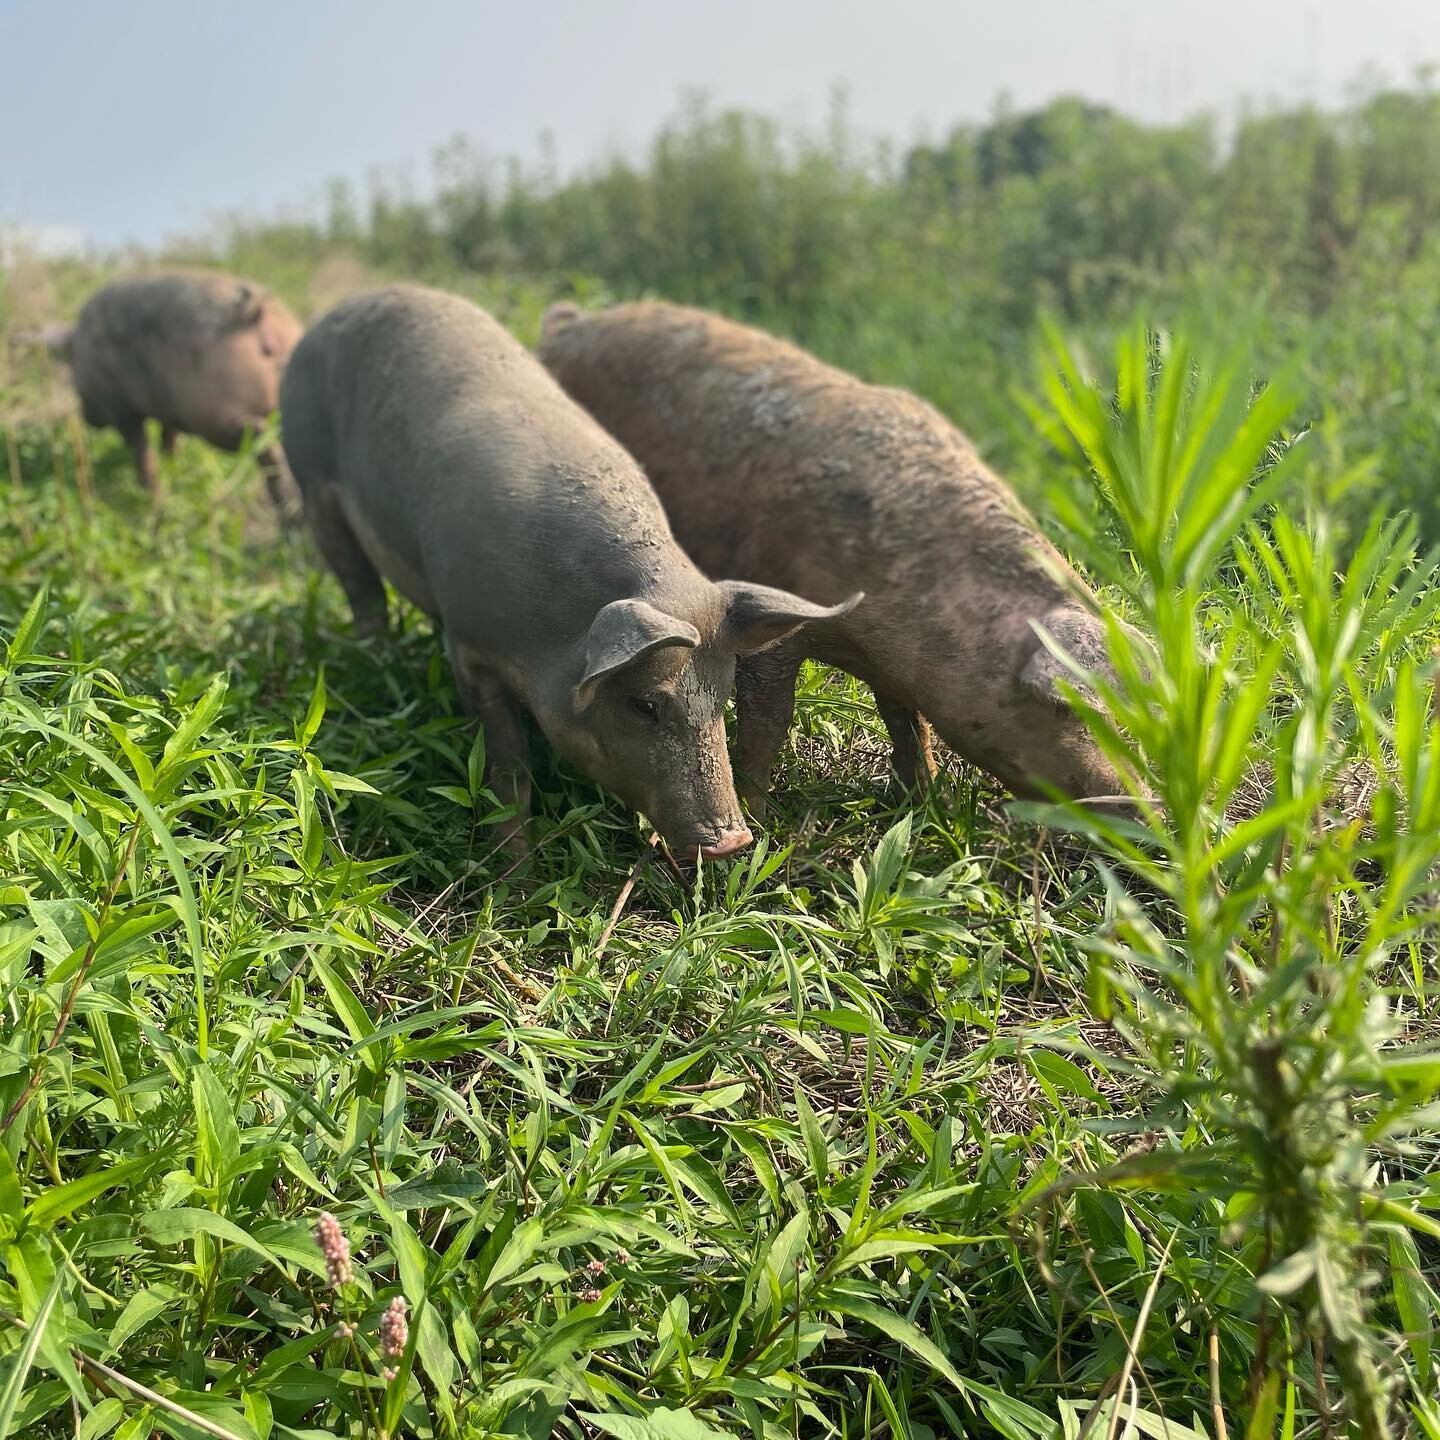 No filter, happy pigs on pasture ❤️